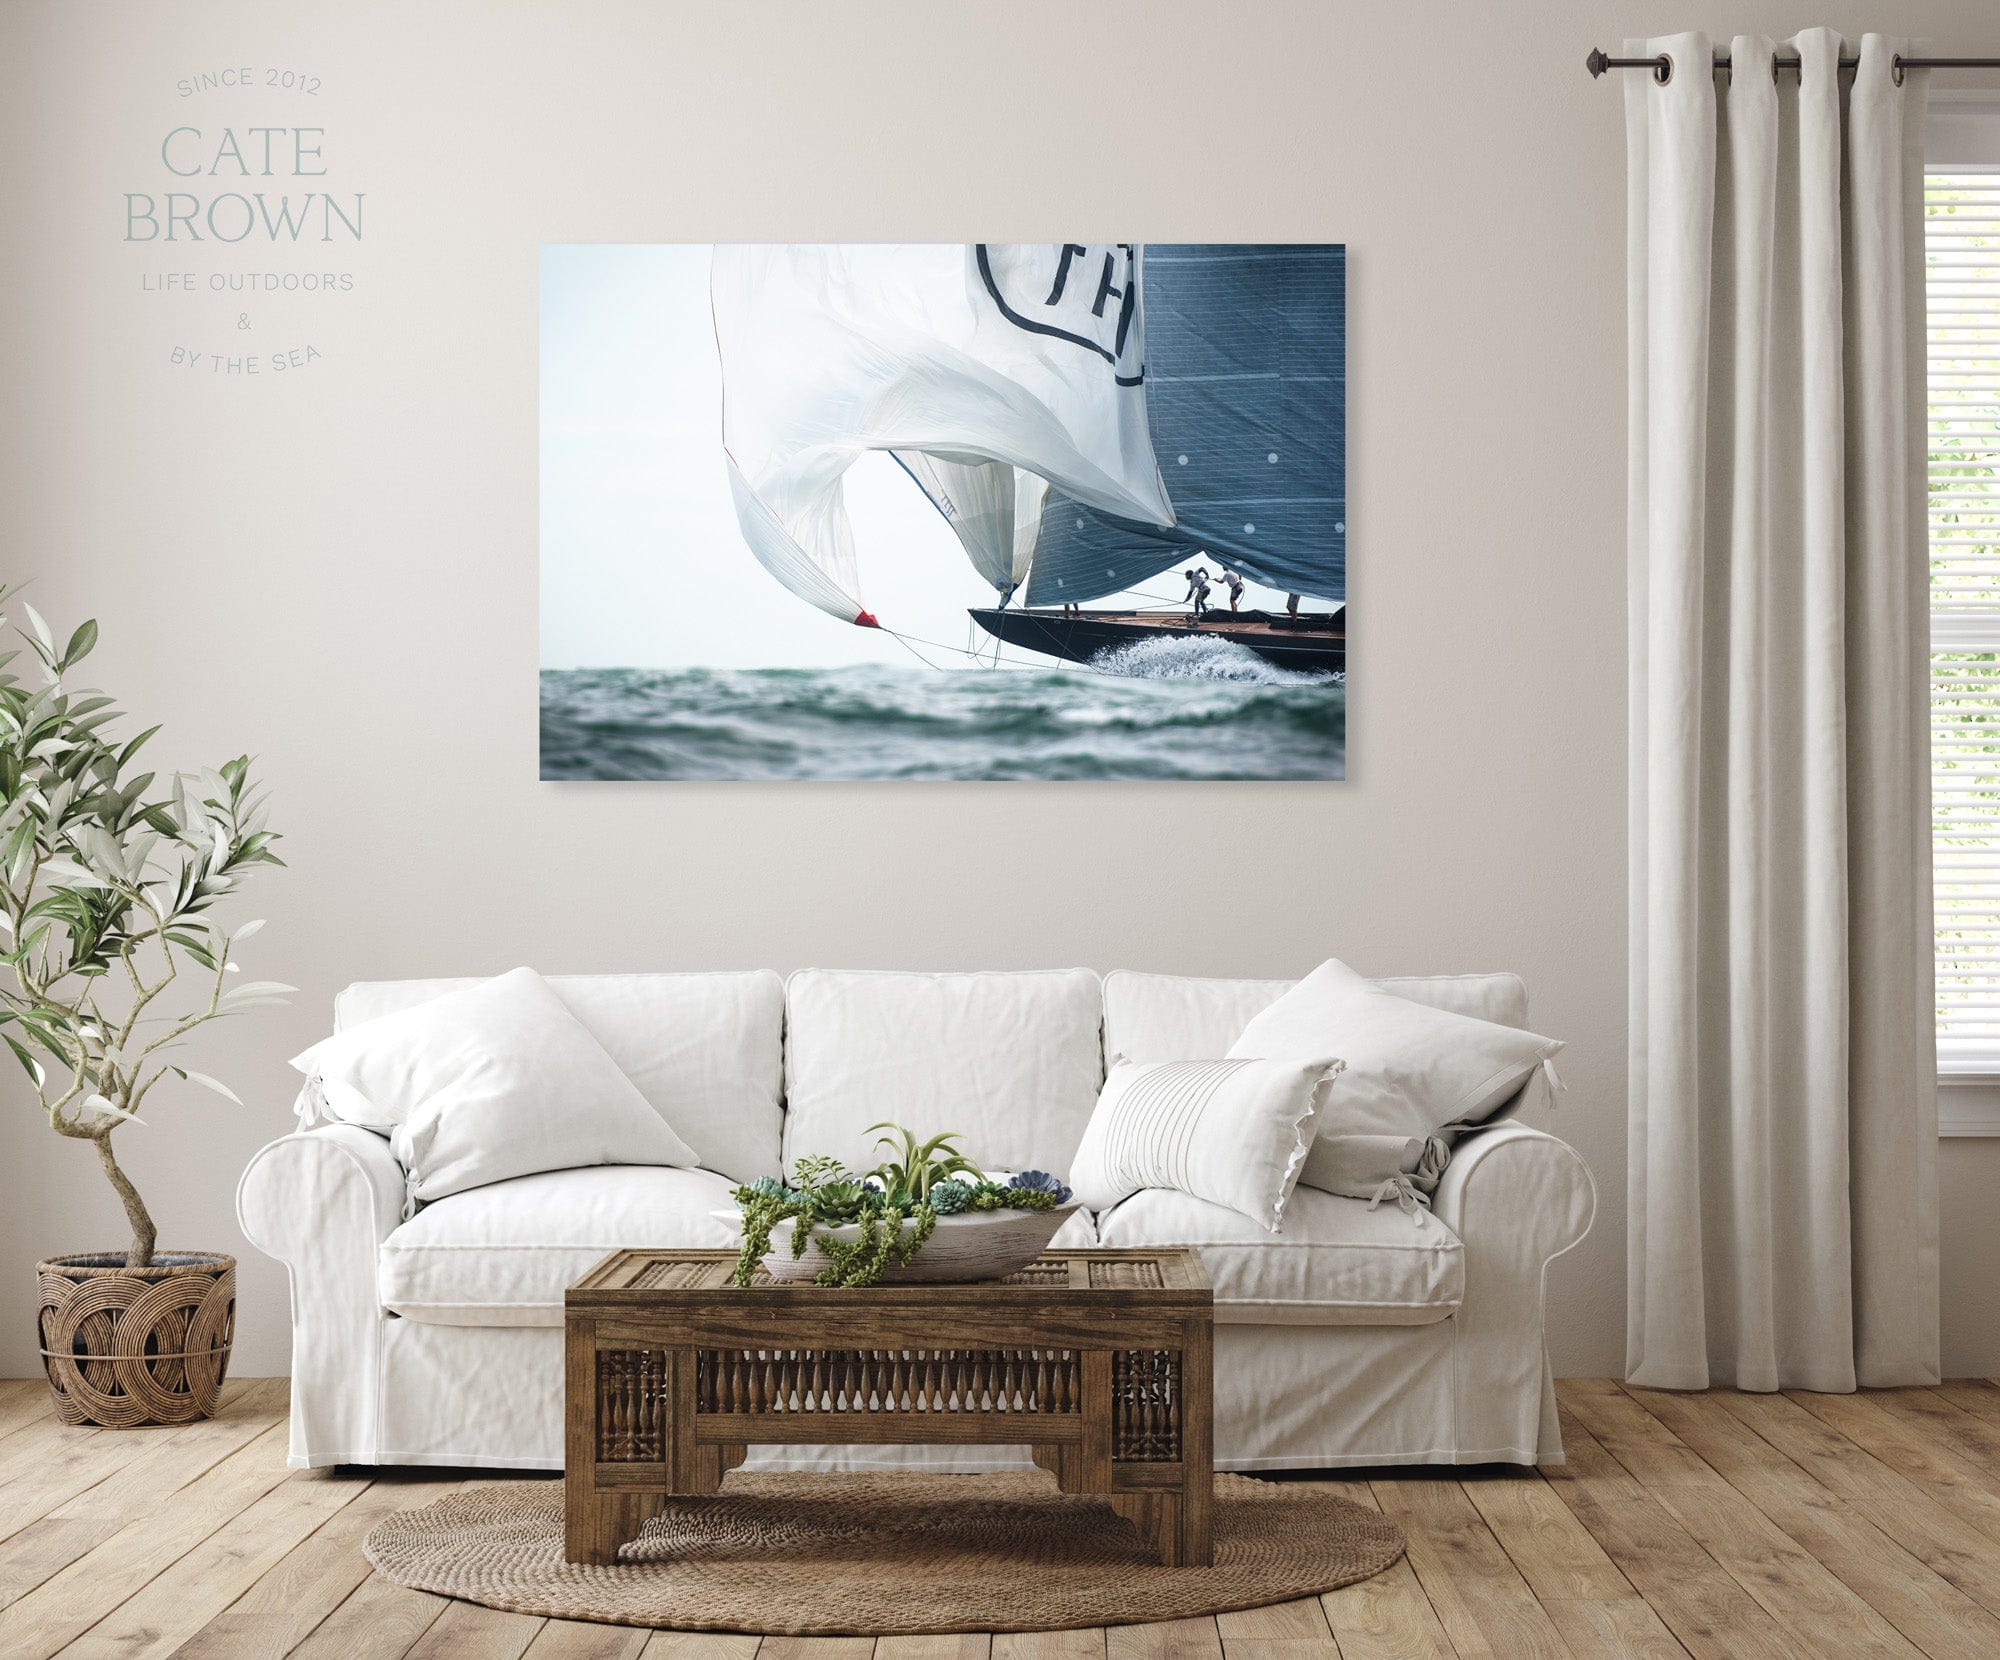 Cate Brown Photo Metal / 30"x45" / None (Print Only) Lionheart Spinnaker  //  Nautical Photography Made to Order Ocean Fine Art